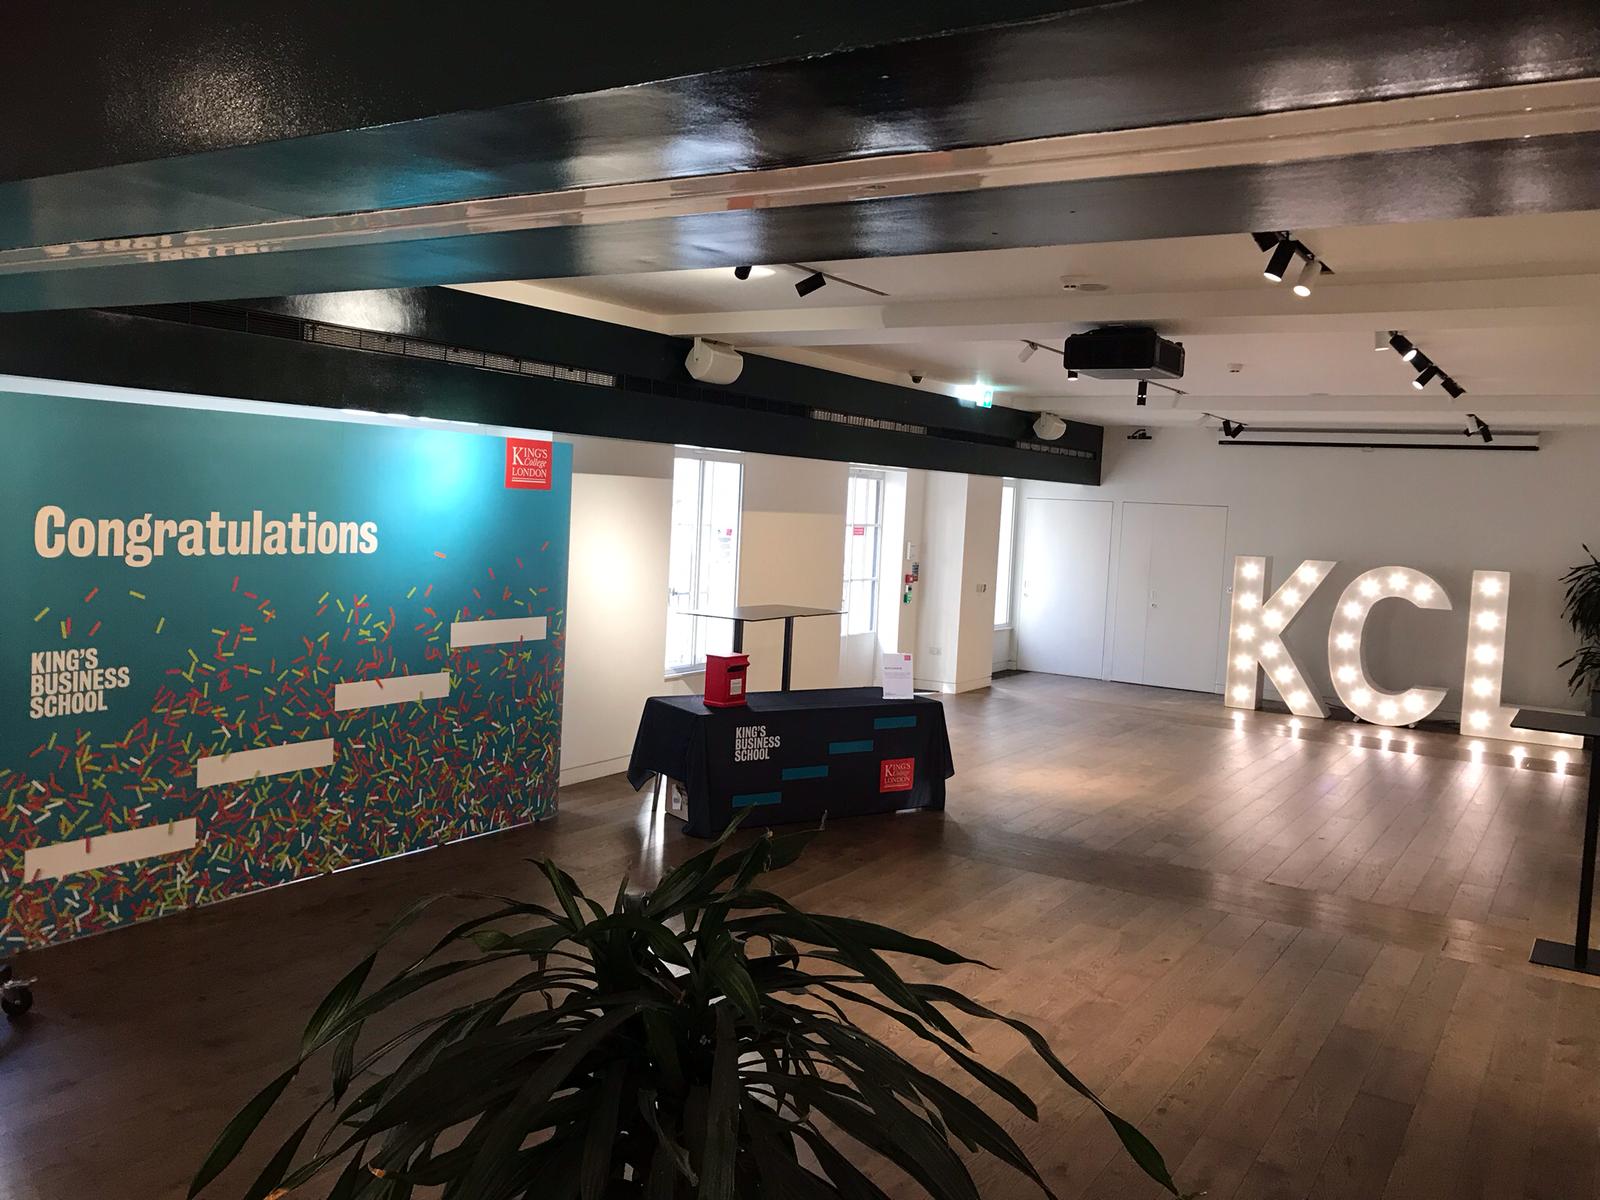 KCL Light Up Letters